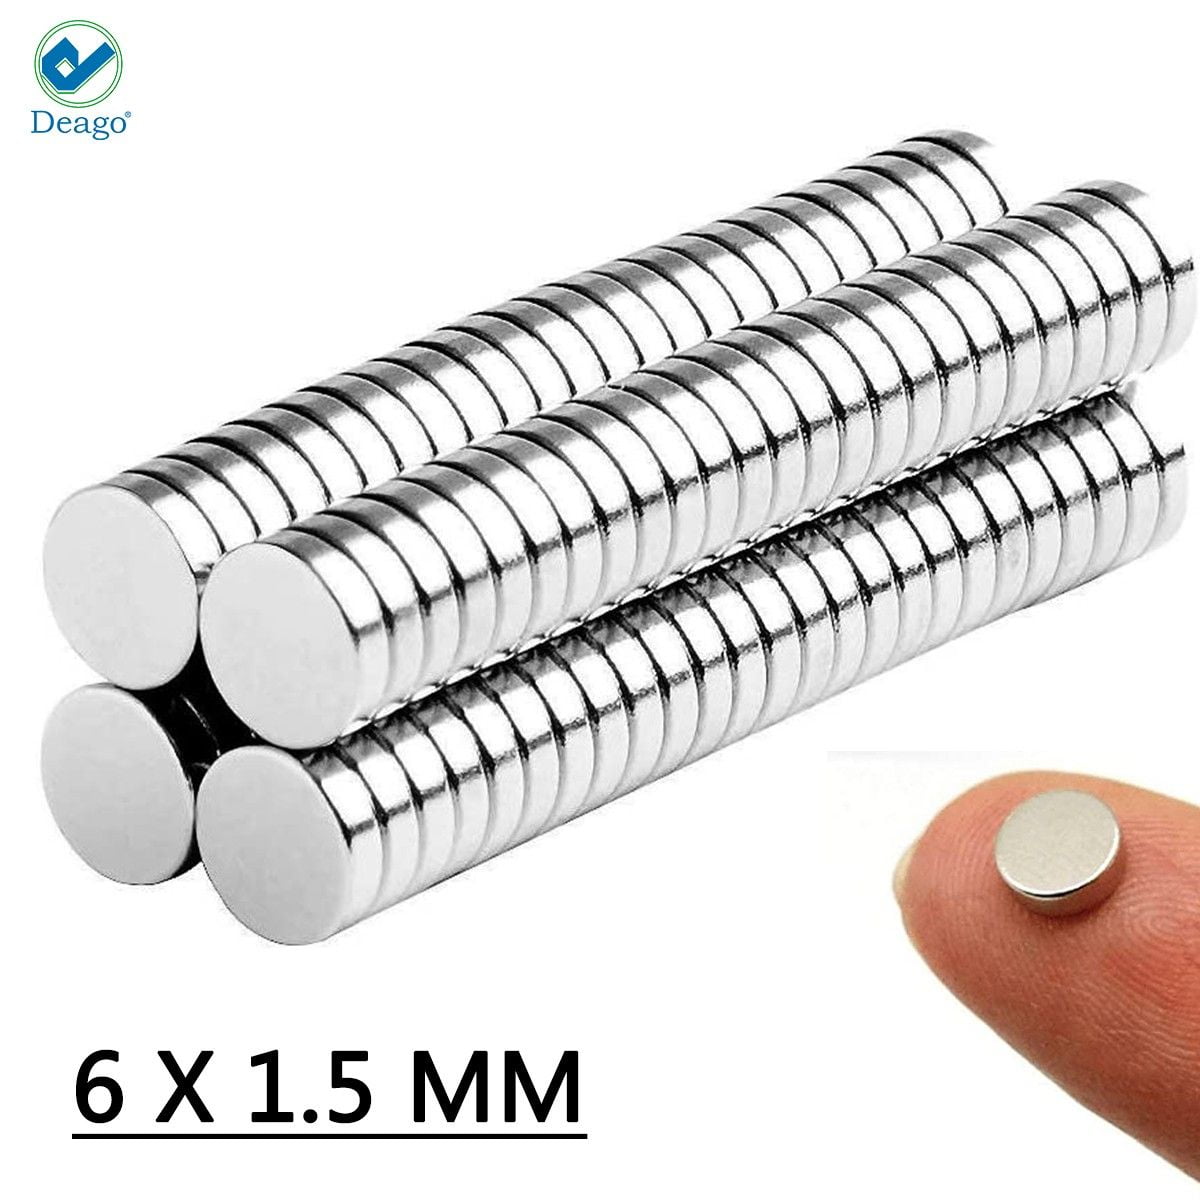 5x3mm Round Brushed Nickel Style for Fridge,Office,Dry Erase Board,Whiteboard,Map,Magnetic Pins Small Tiny Magnets Rare Earth Magnets Pack of 30